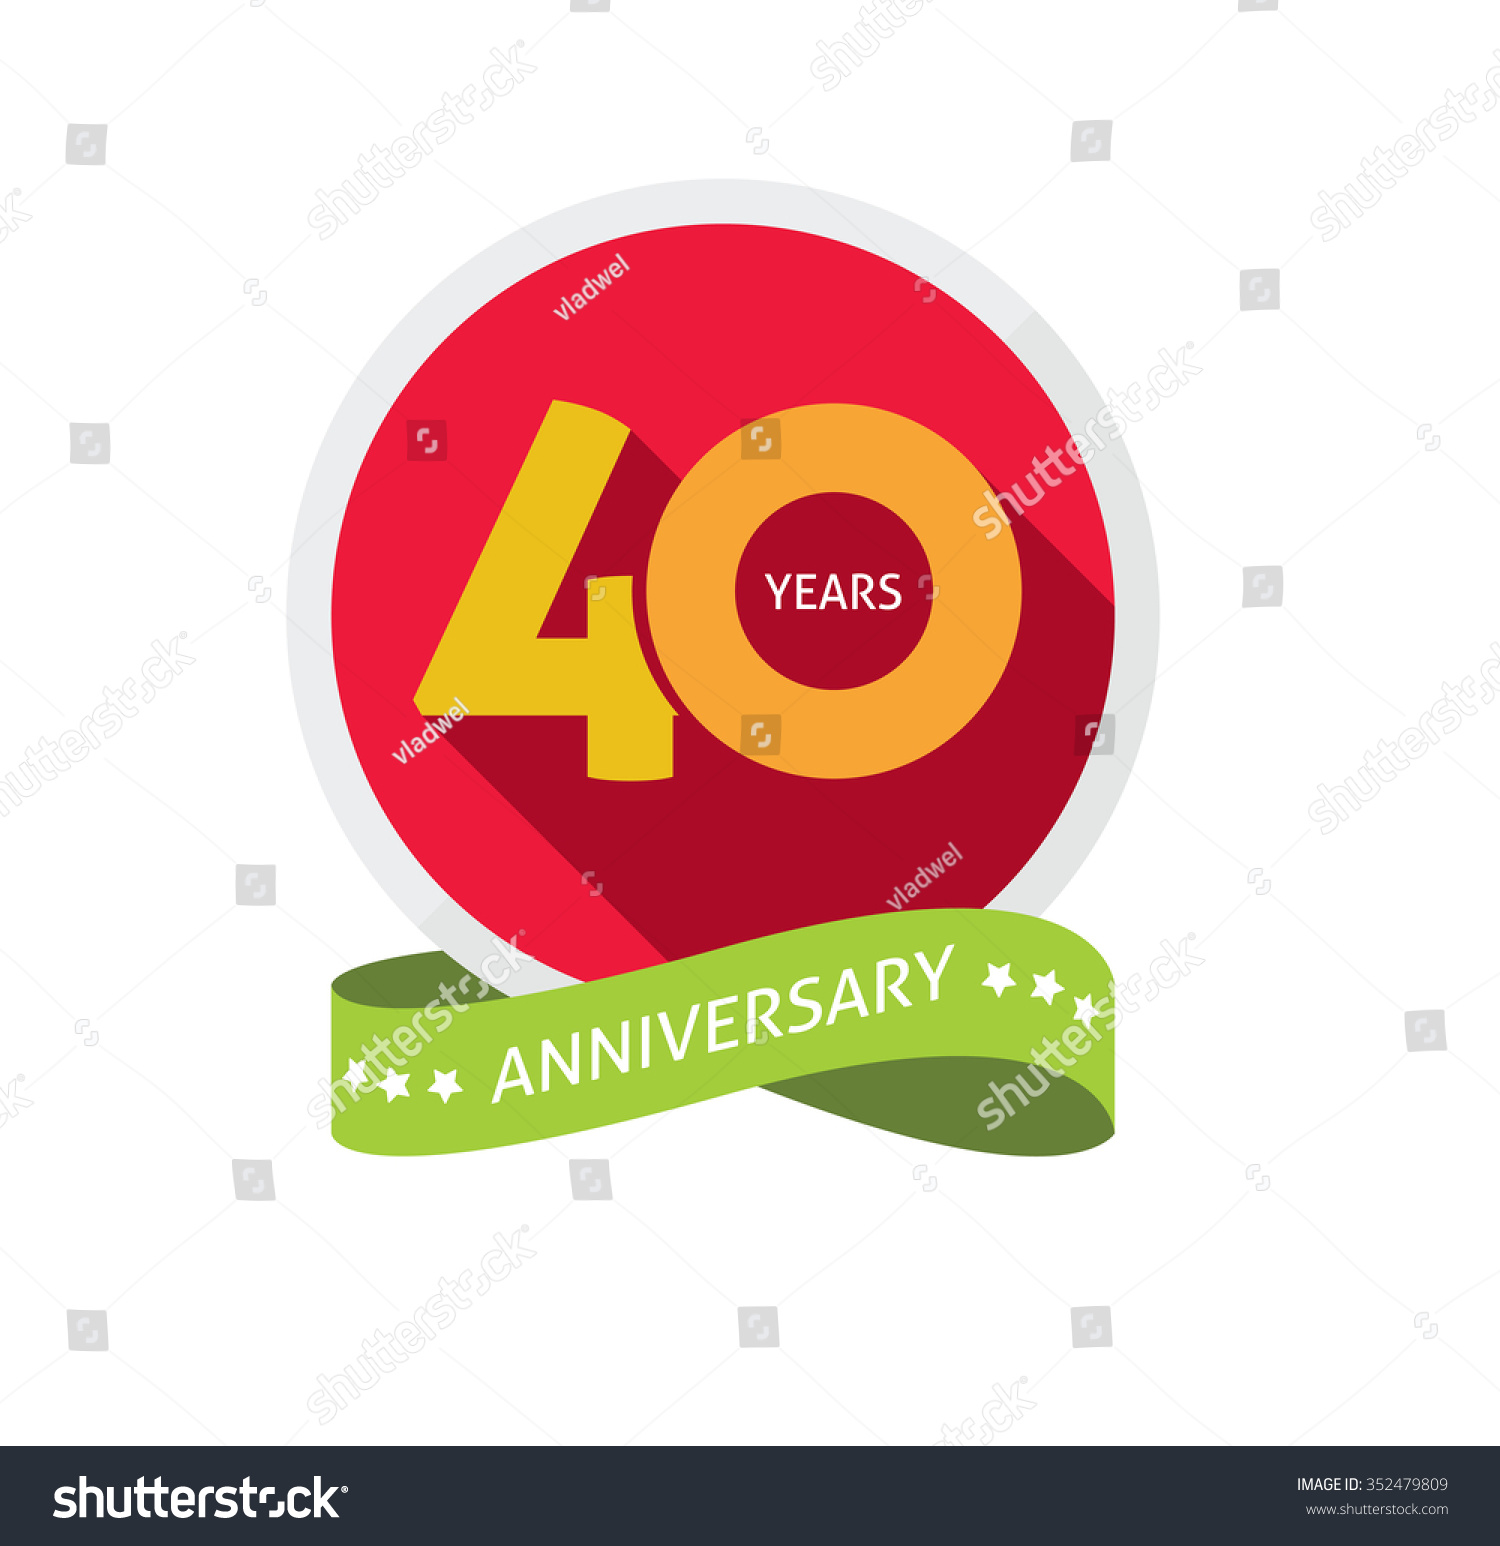 40th-anniversary-logo-template-with-shadow-on-circle-number-4-four